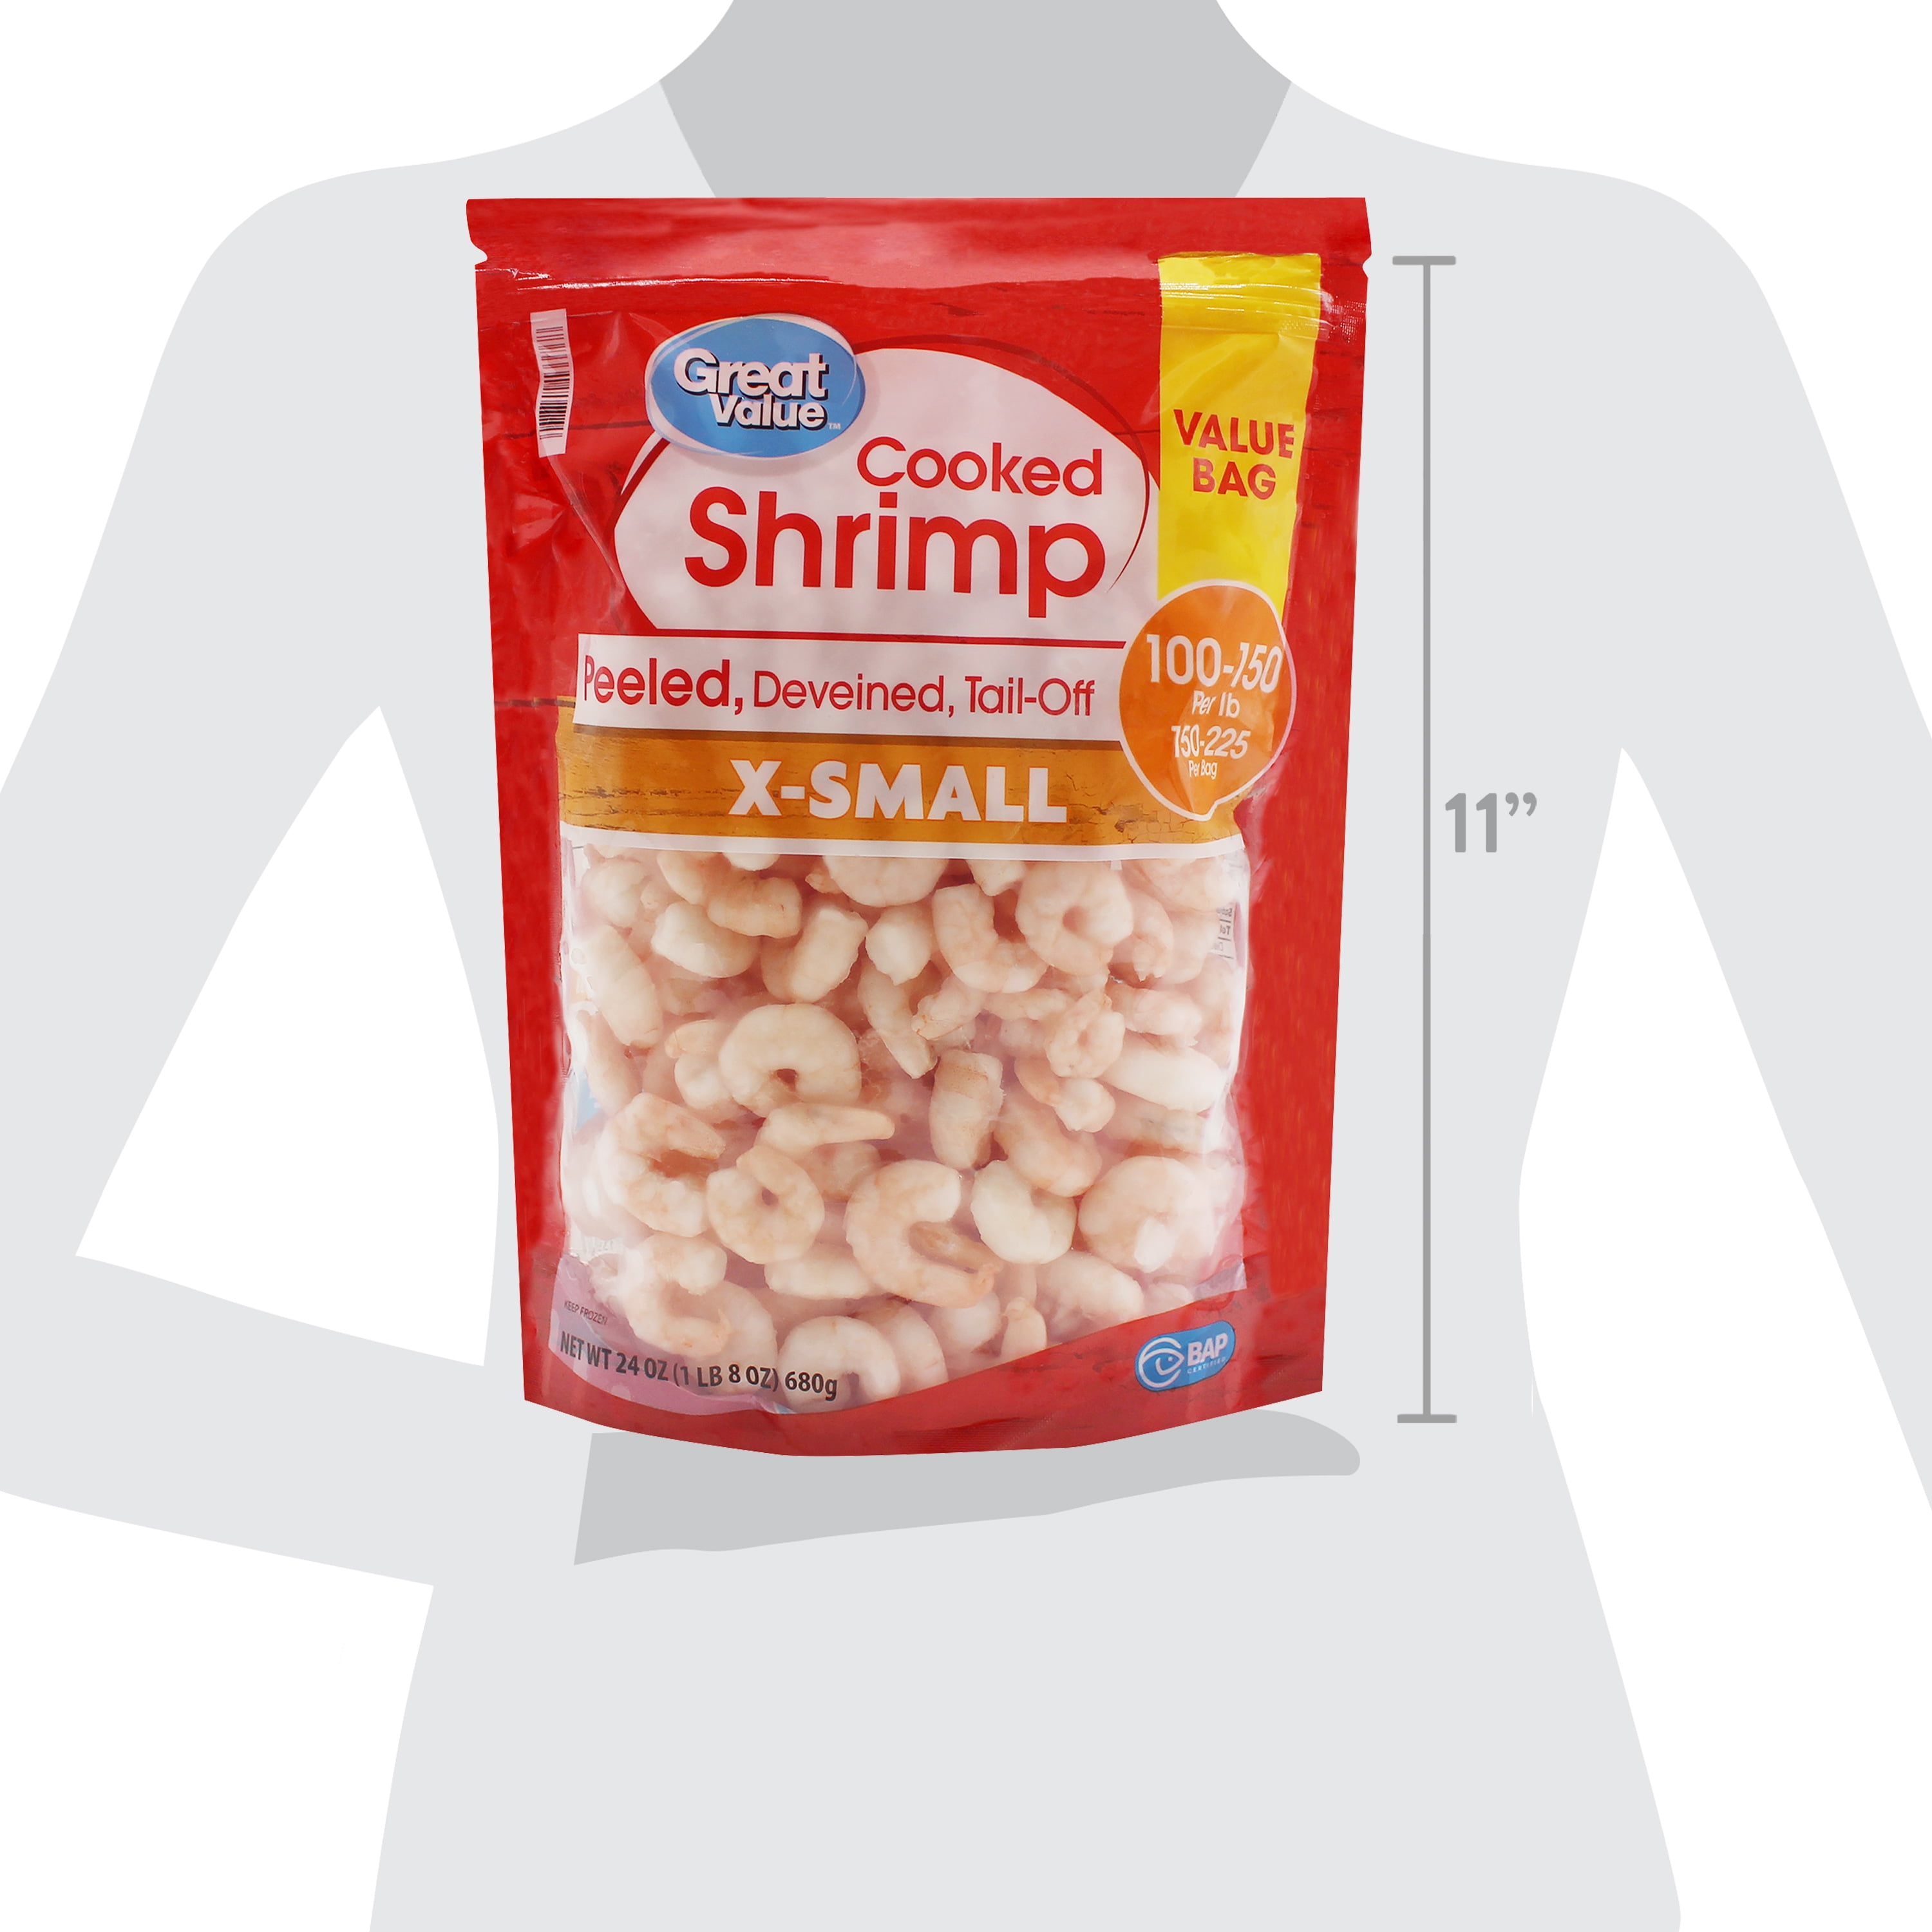 Great Value Frozen Cooked Extra Small Peeled & Deveined, Tail-off Shrimp  Value Bag, 24 oz (100-150 Count per lb)